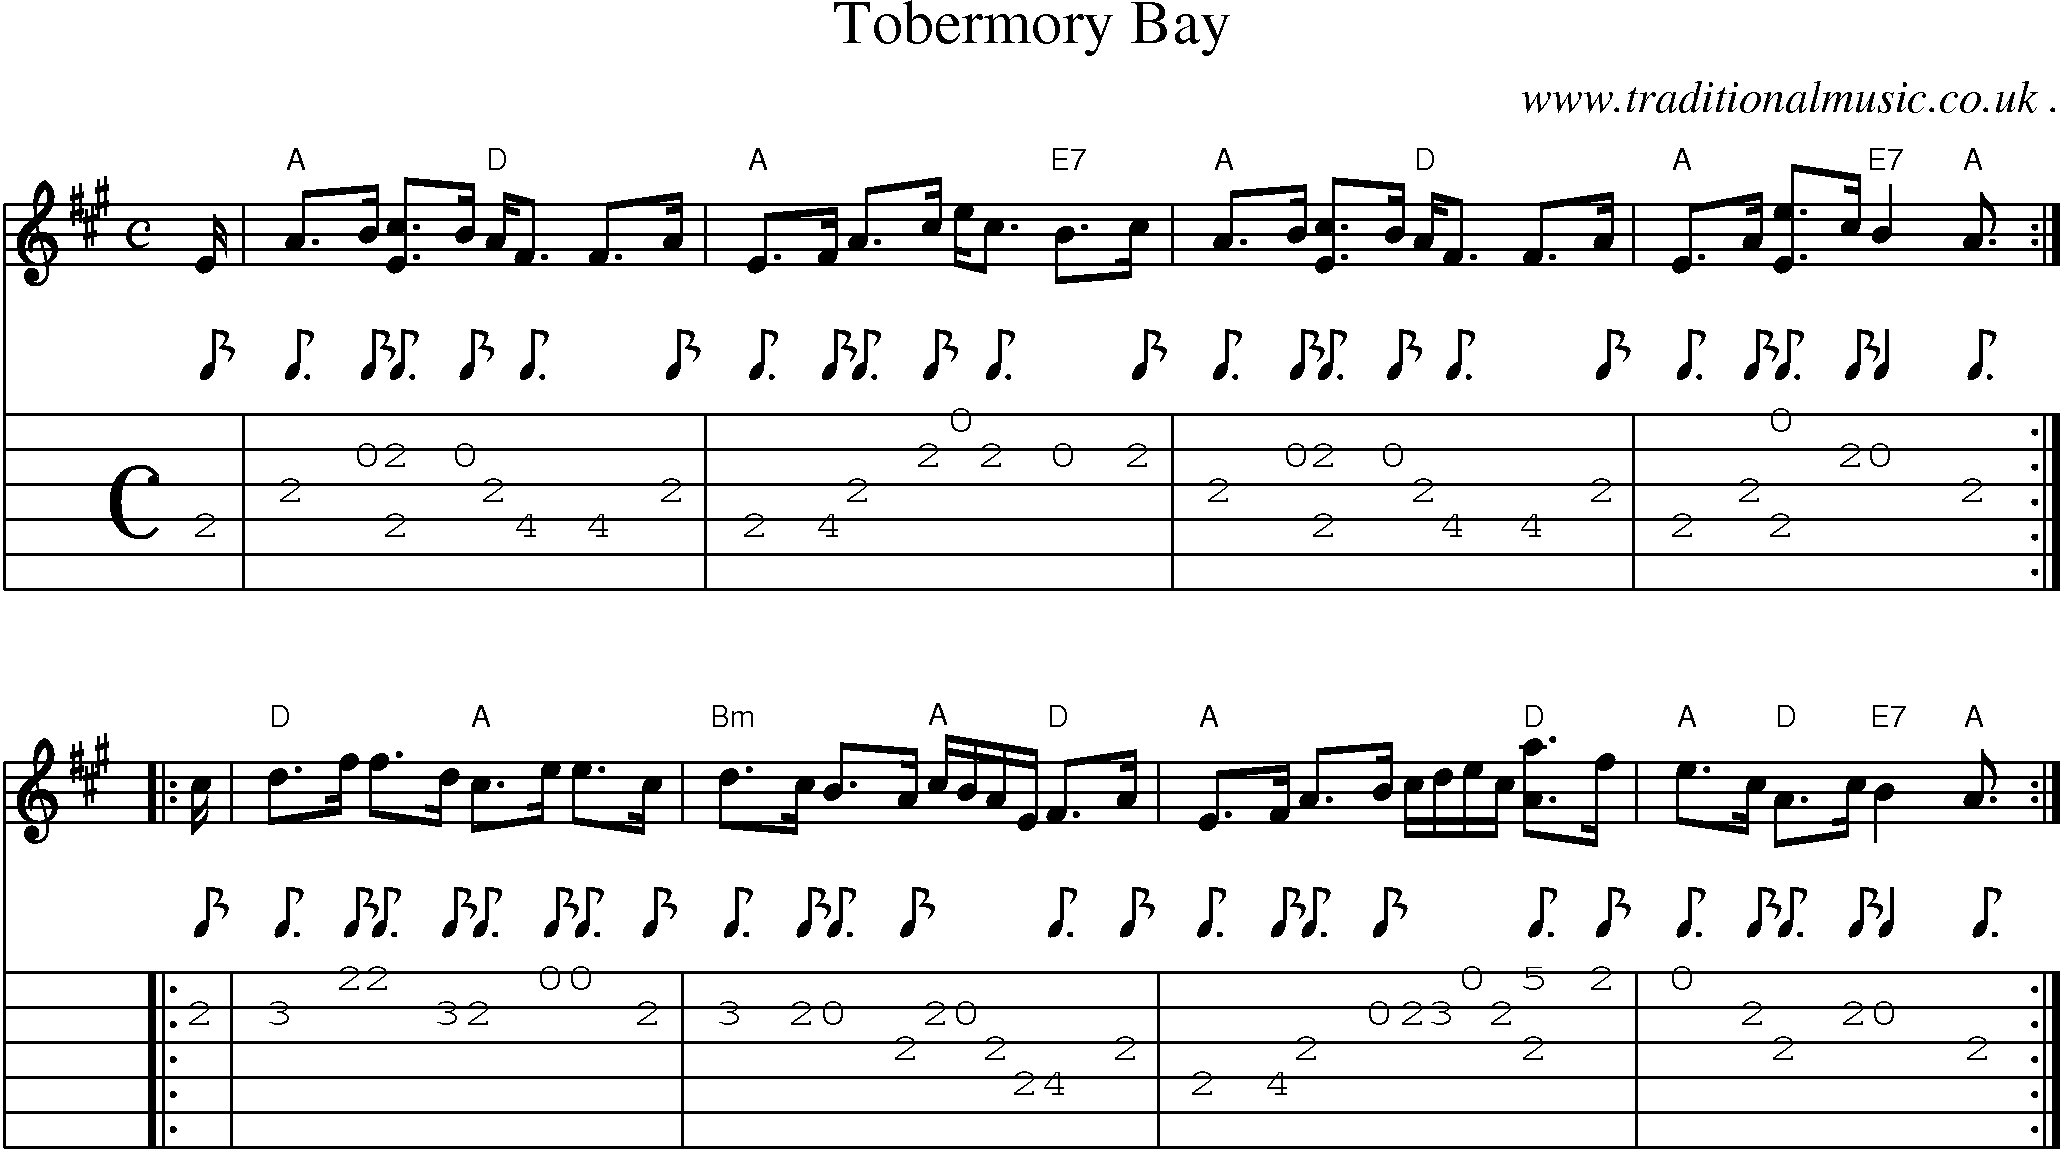 Sheet-music  score, Chords and Guitar Tabs for Tobermory Bay